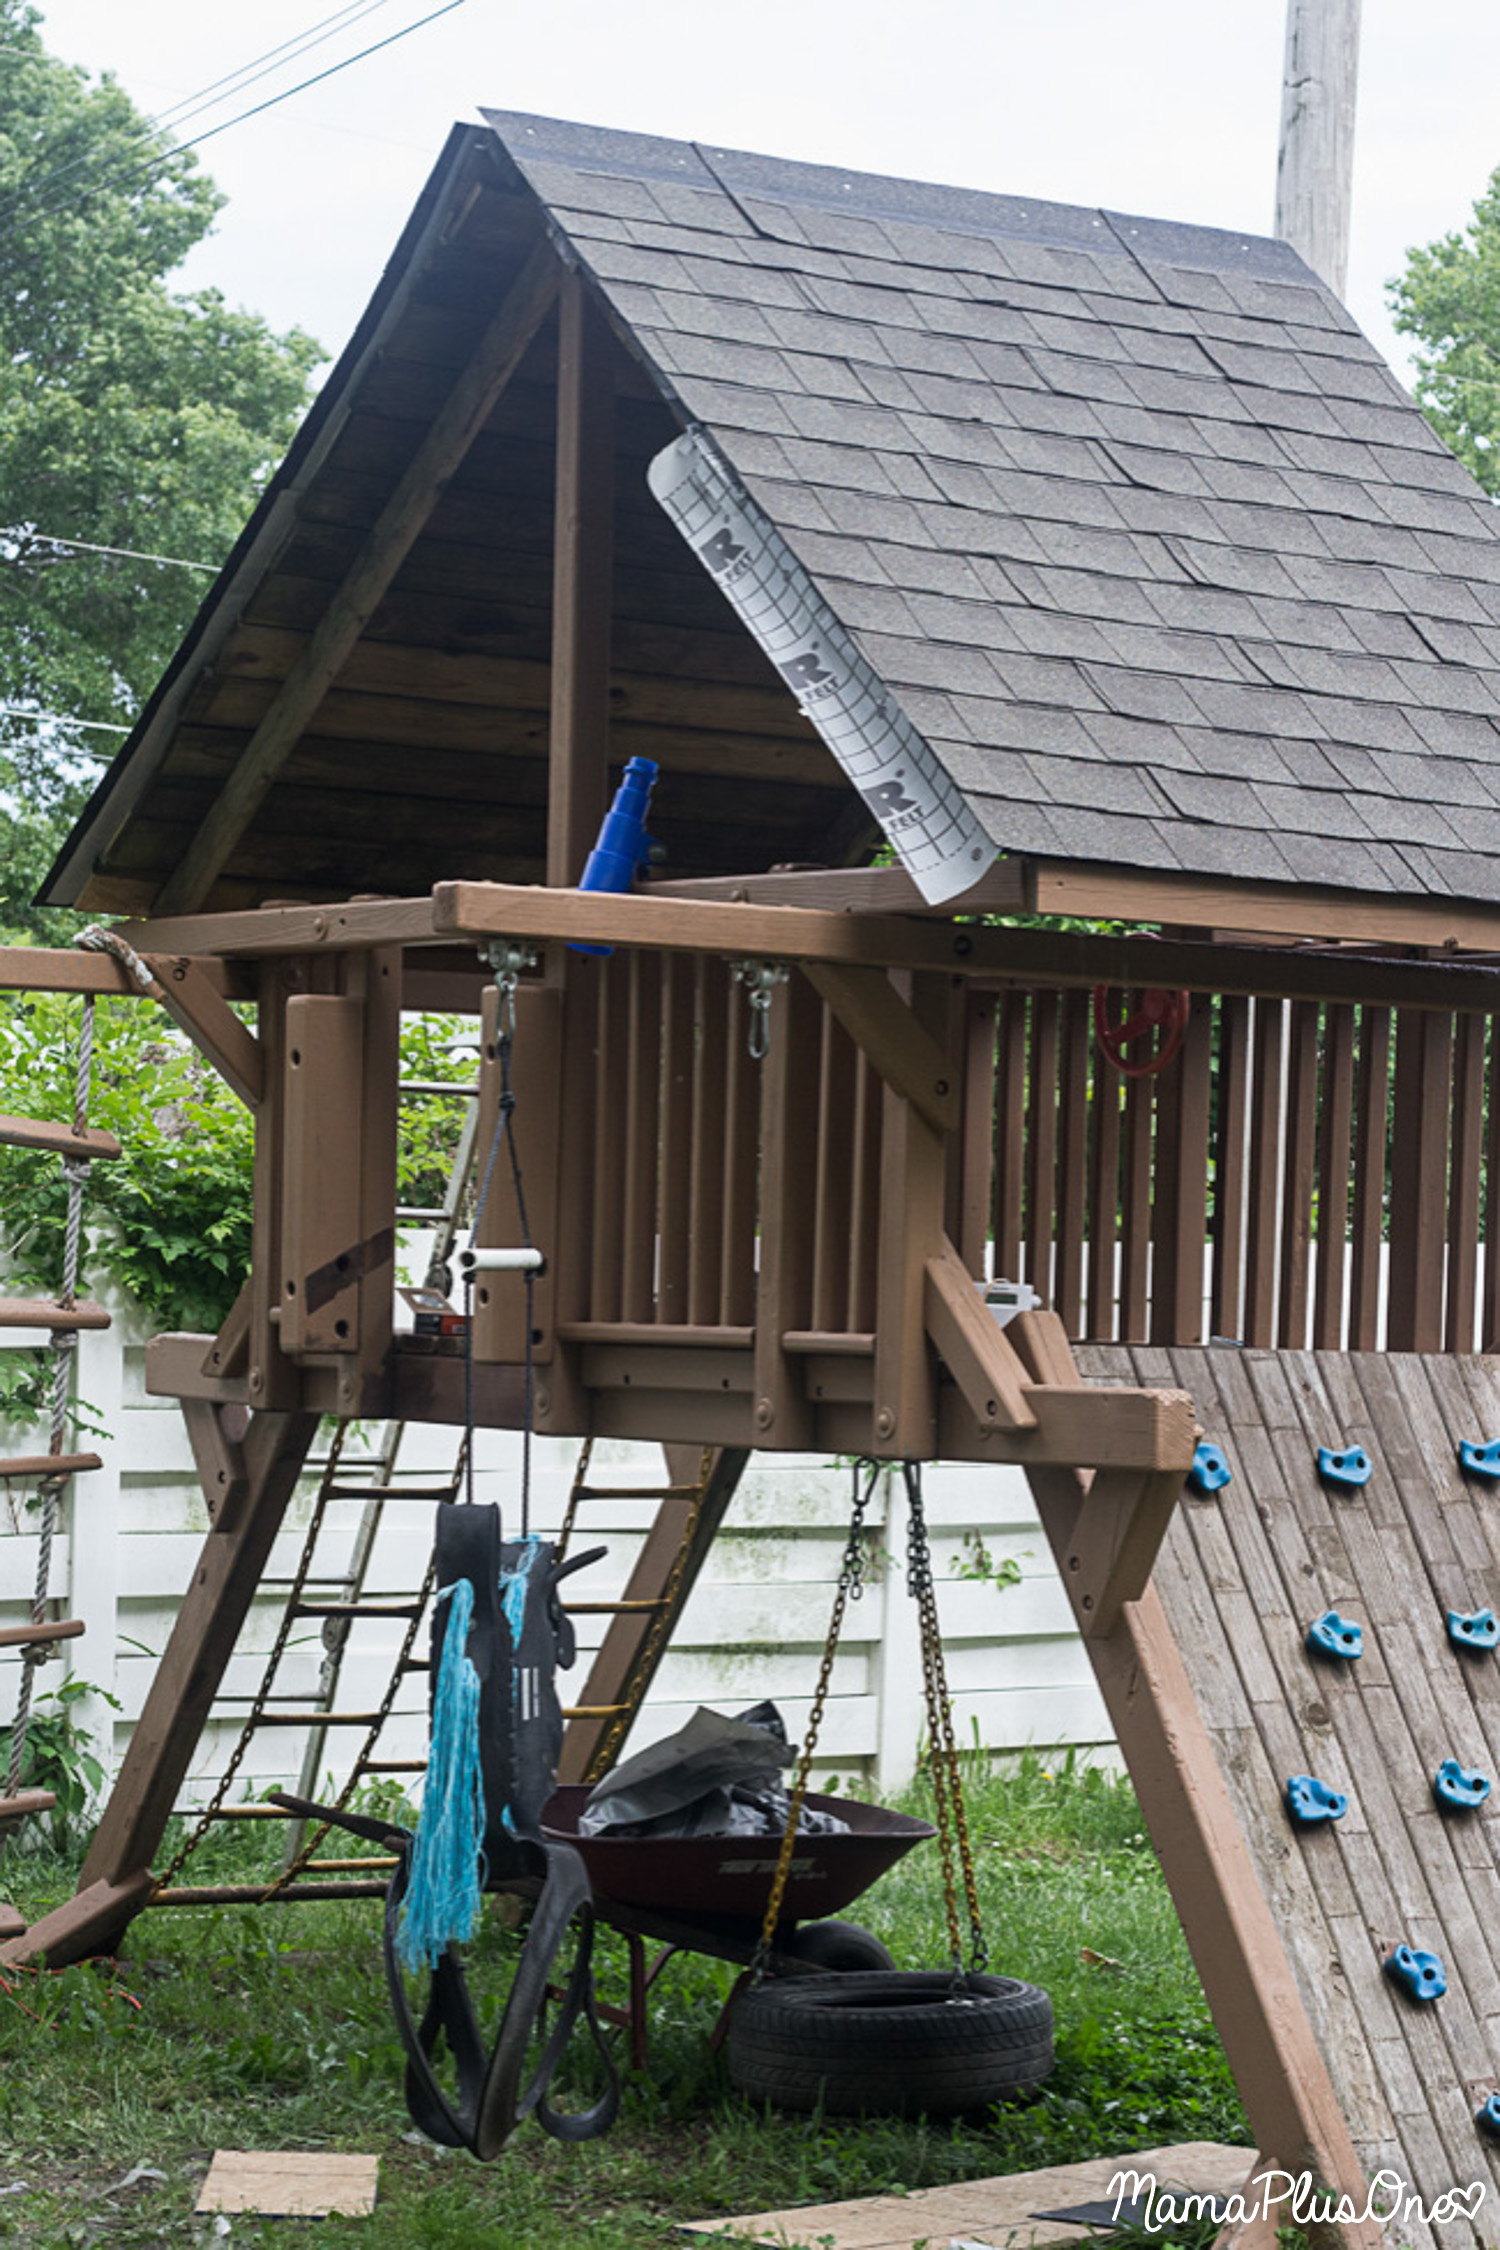 When you invest in a playset, you want it to last-- that's not an investment to take lightly. With the right care, you can make your backyard play set last decades, through your kids AND grandchildren! Here's how to help make your playset last with some TLC and GAF Shingles. #RoofedItMyself [ad]